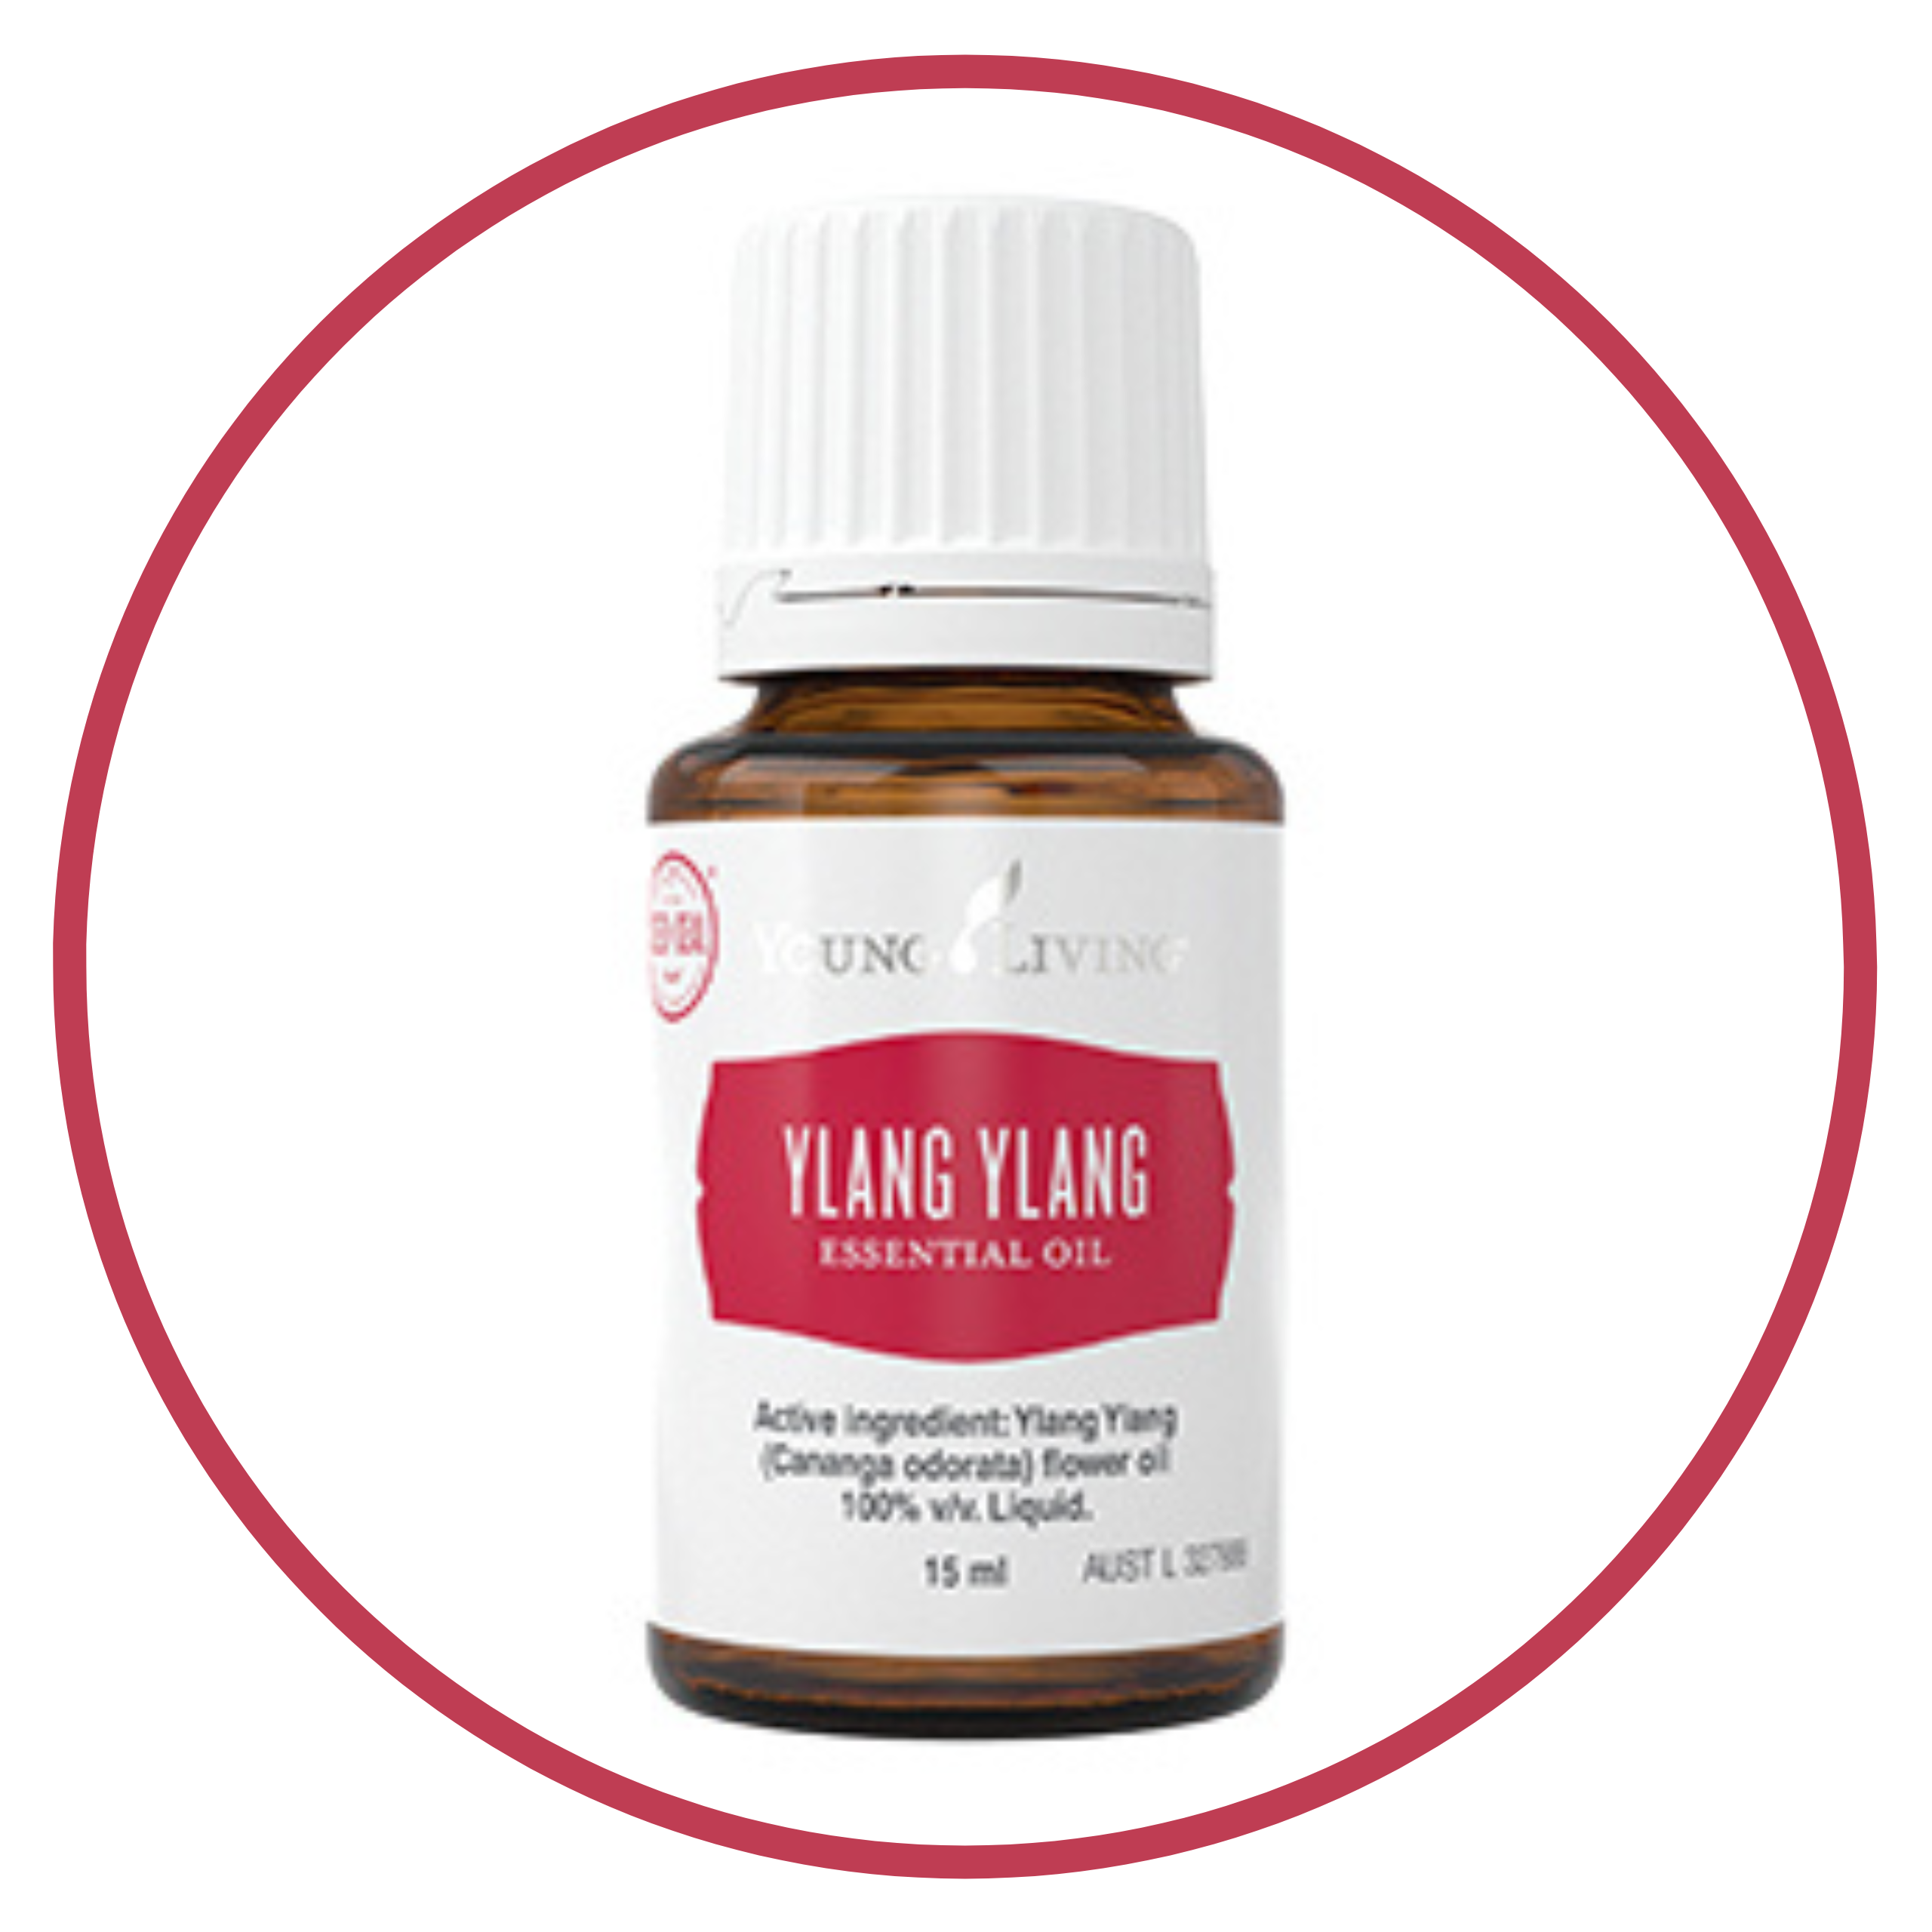 Image of Young Living 'ylang ylang' essential oil bottle